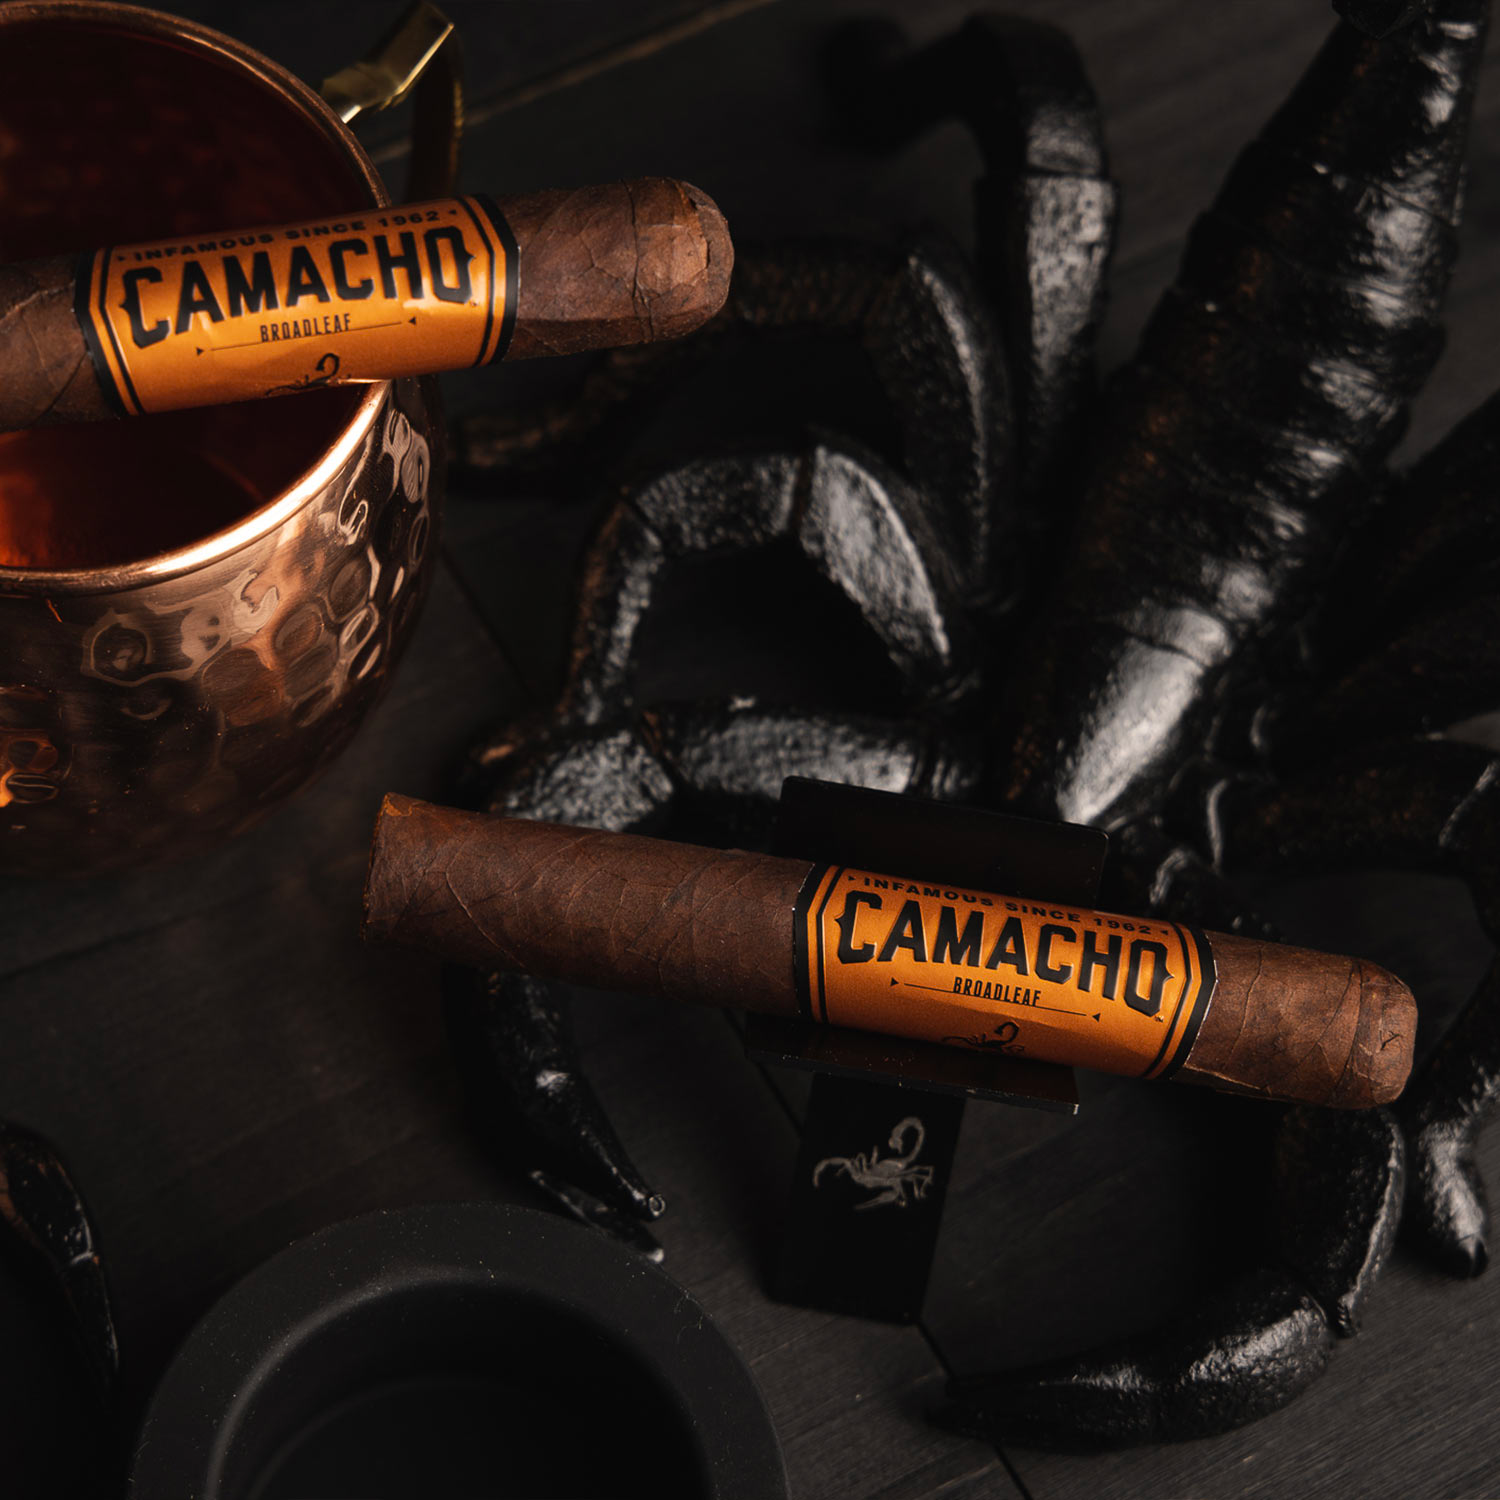 A close-up image of Camacho Broadleaf cigars, showcasing their silky appearance and bold smoke.